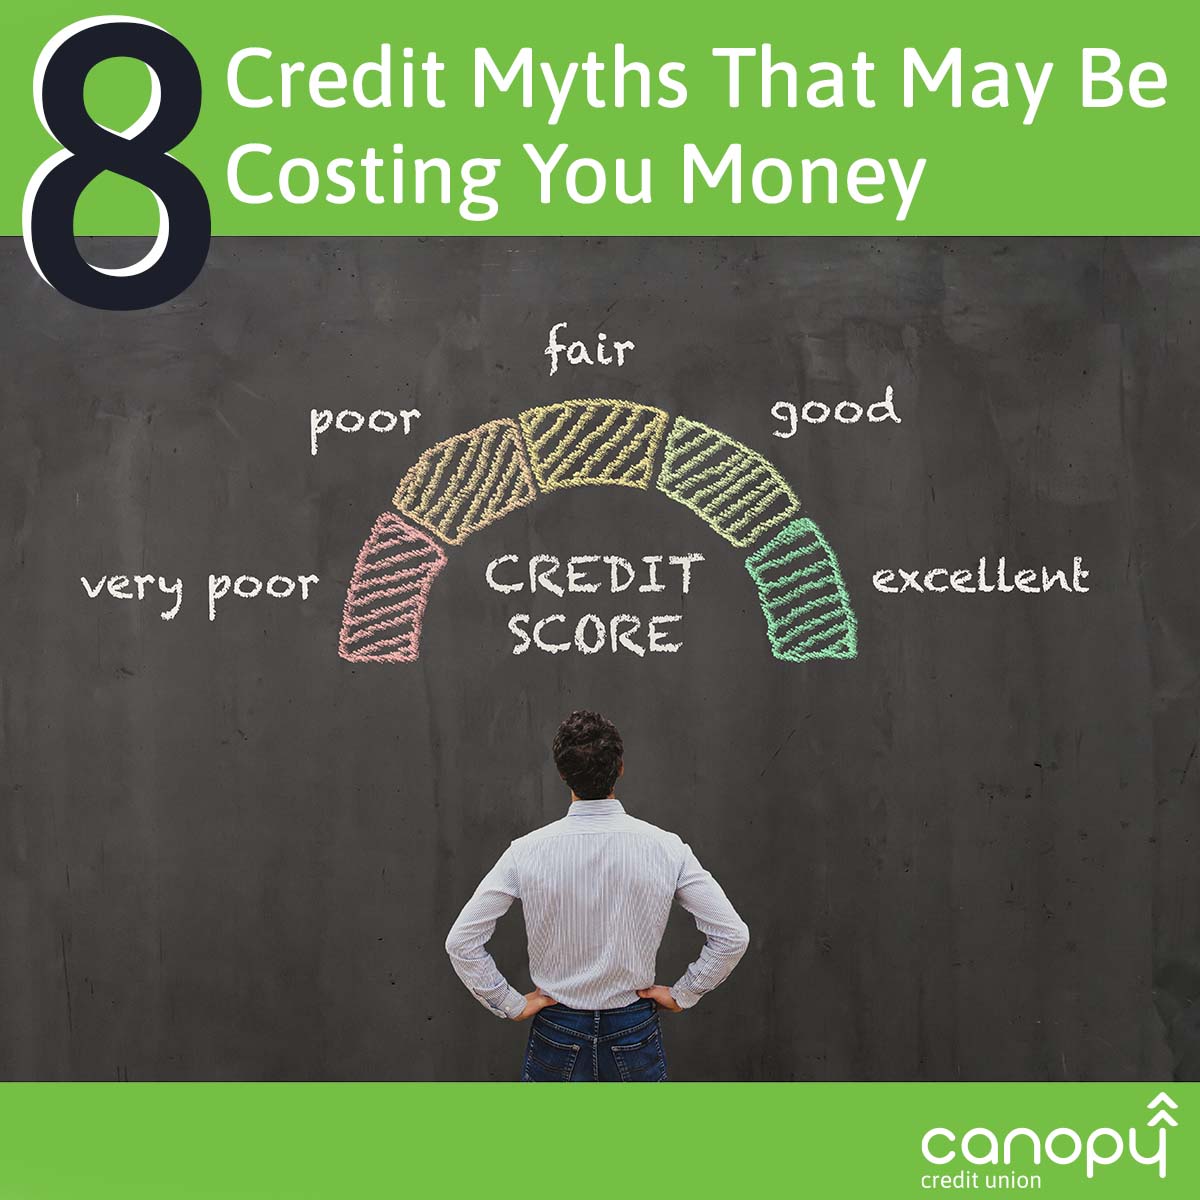 8 credit myths that may be costing you money, image of man standing in front of credit scoring odometer in chalk